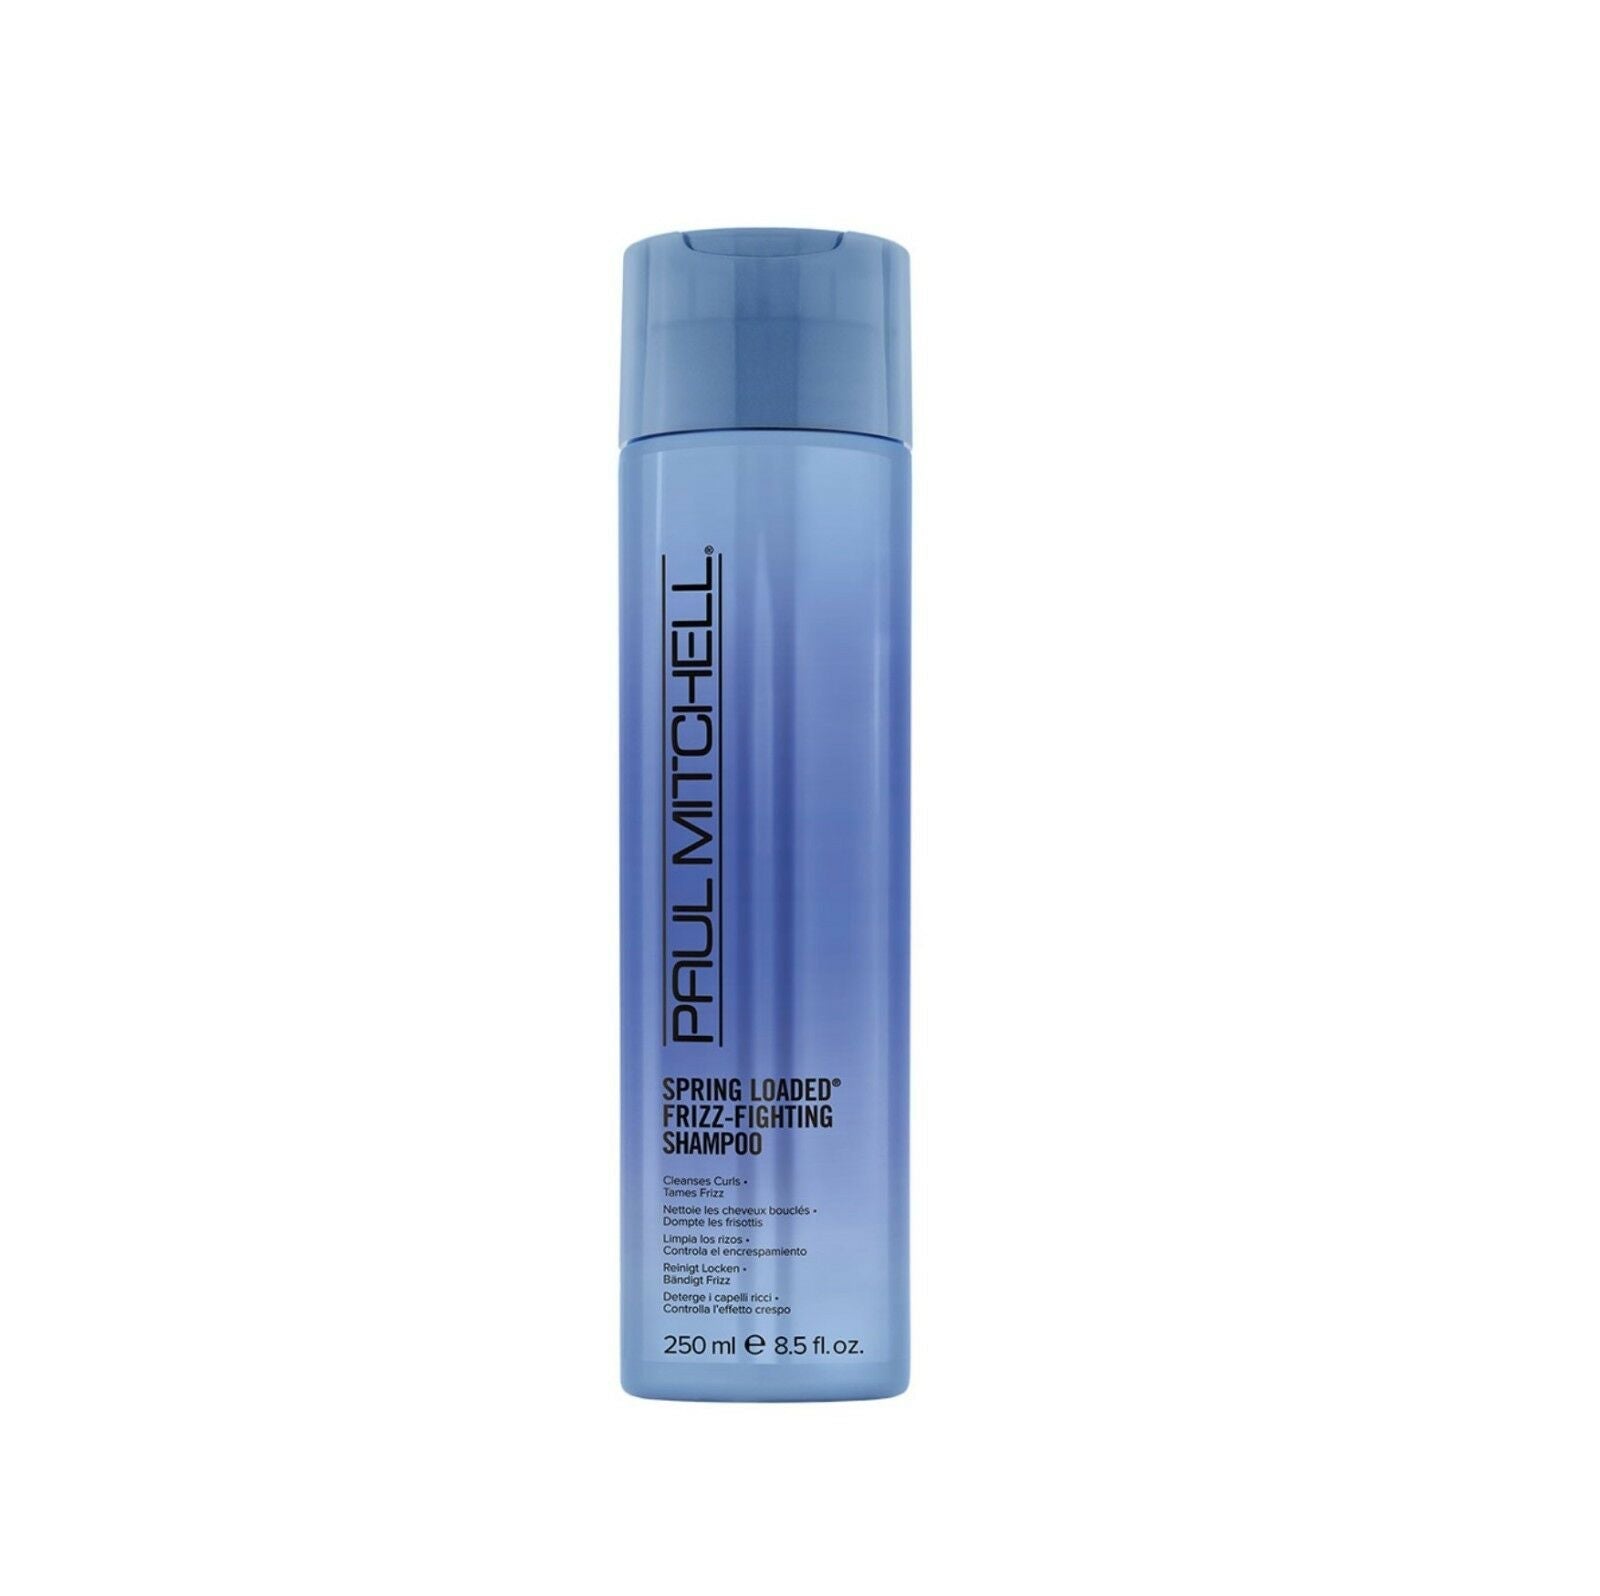 Paul Mitchell Spring Loaded Frizz-Fighting Tames Frizz Shampoo and Conditioner Duo - On Line Hair Depot